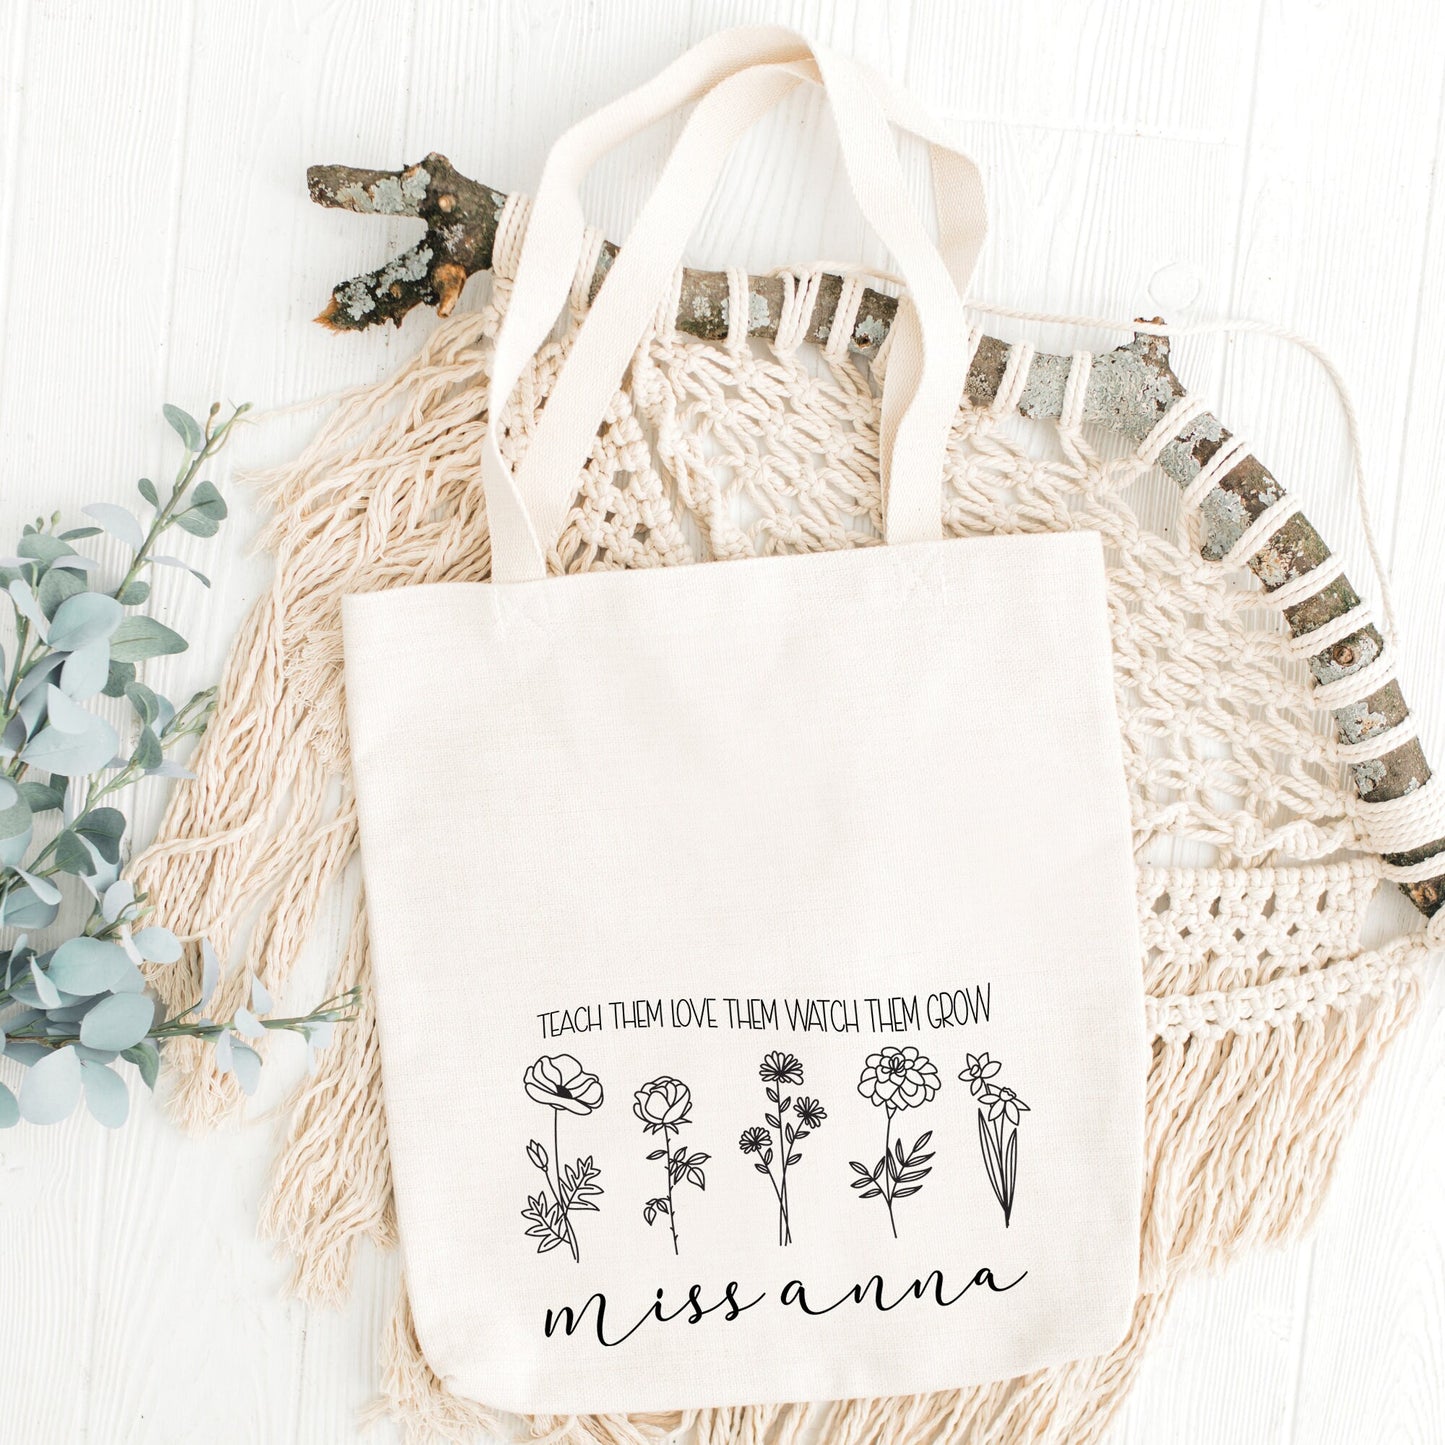 Personalised Teacher Tote Bag, Minimalist Flowers Tote For Teachers Assistants Gift, Black & White